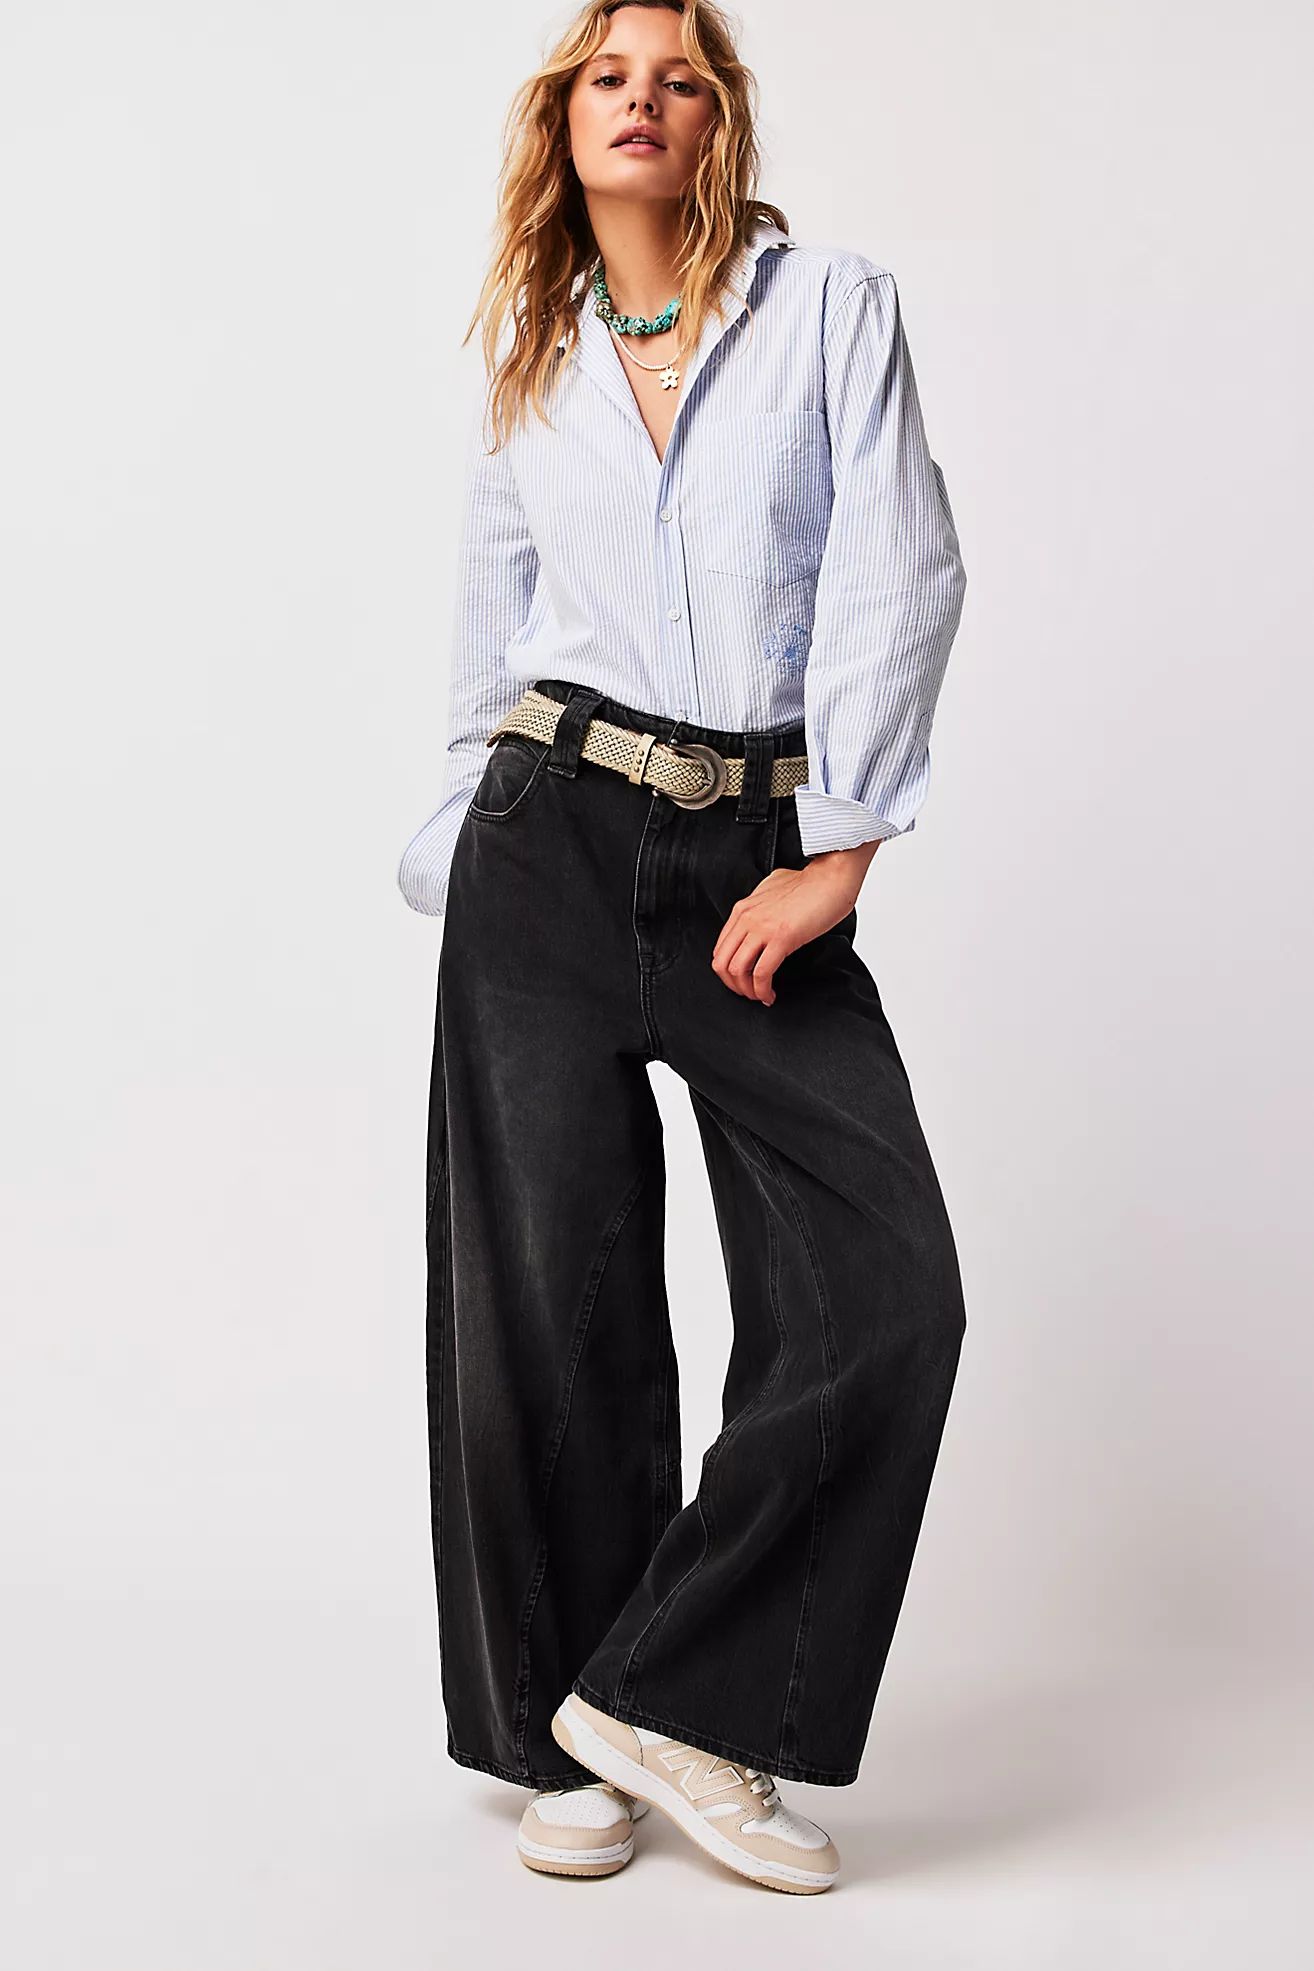 Chill Vibes Dropped Wide-Leg Jeans | Free People (Global - UK&FR Excluded)